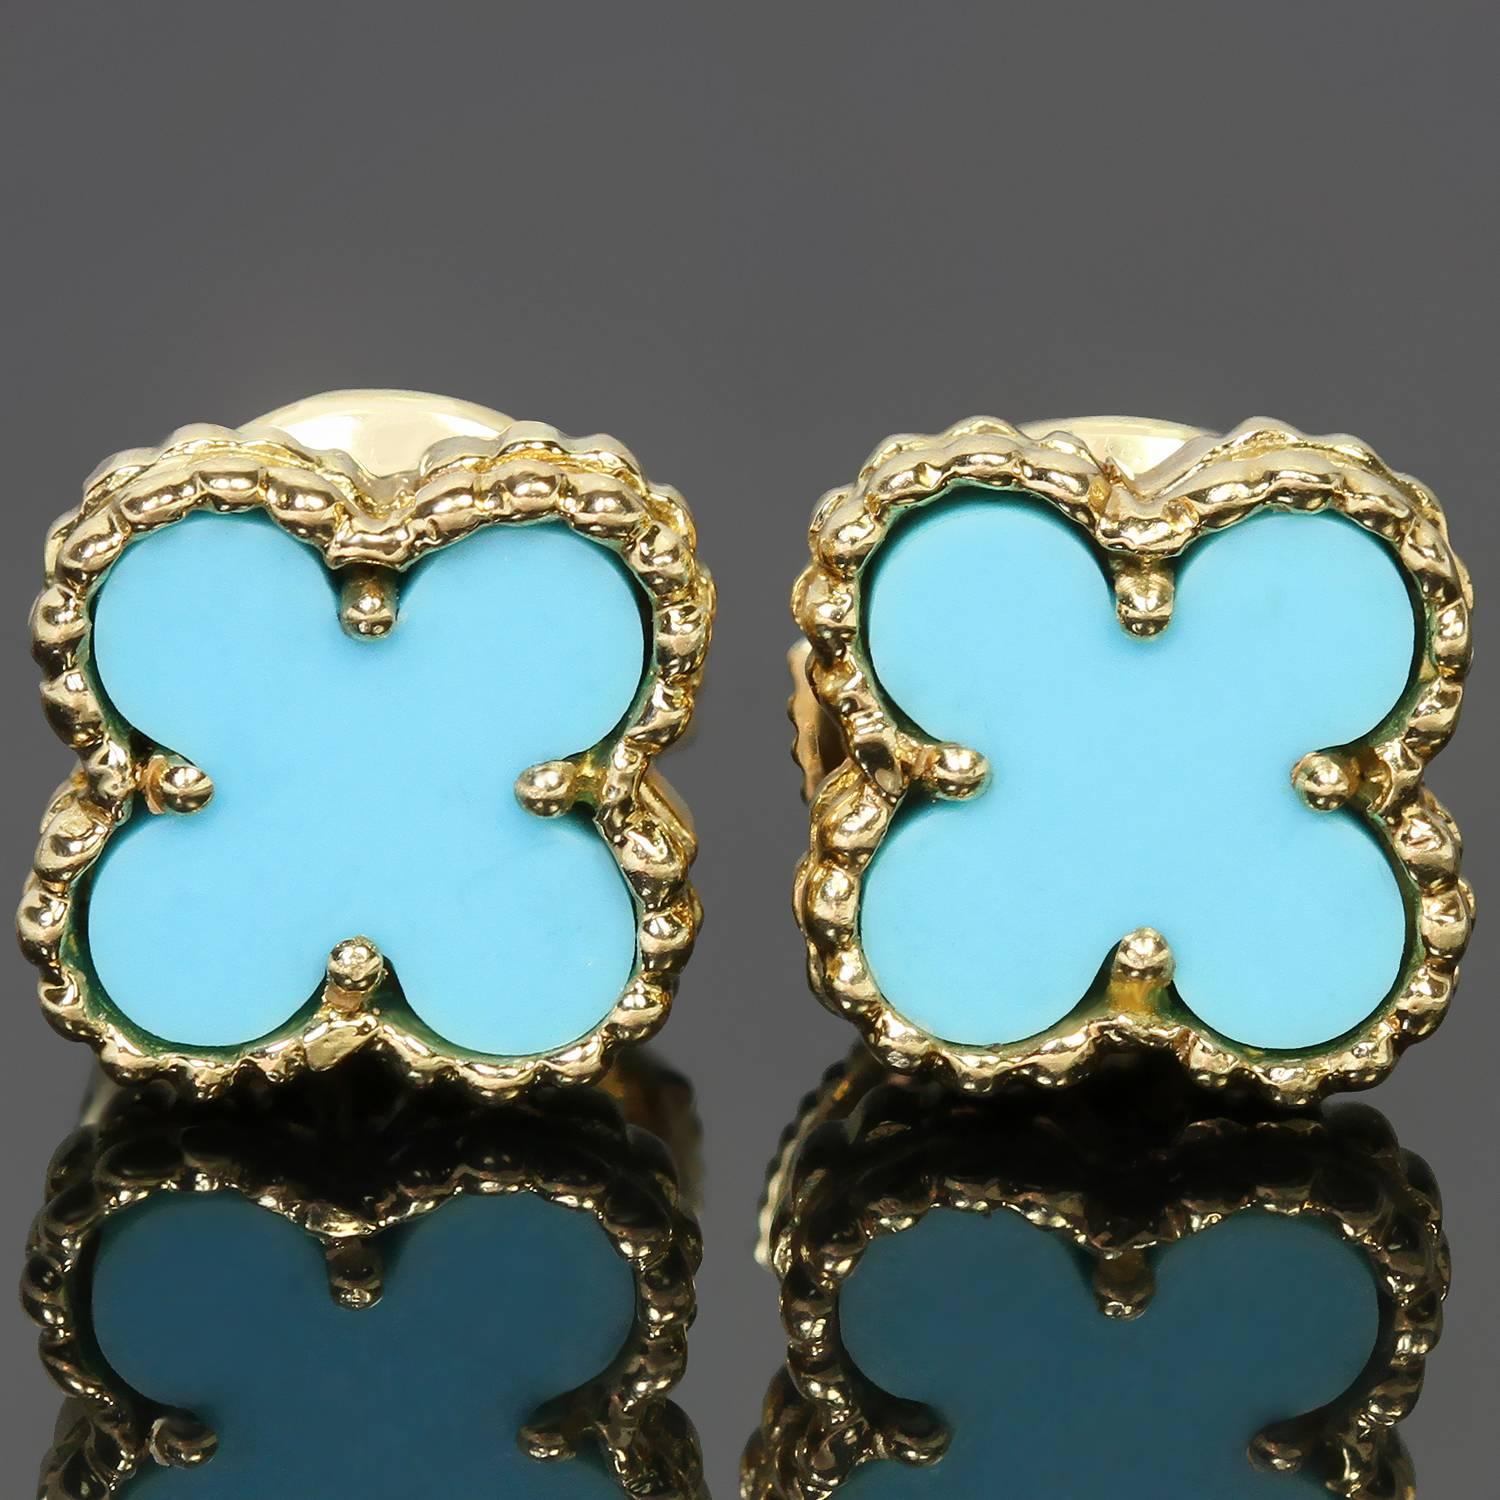 These stunning Van Cleef & Arpels stud earrings from the iconic Sweet Alhambra collection feature the lucky clover design crafted in 18k yellow gold and set with blue turquoise. Made in France circa 2000s. Measurements: 0.35